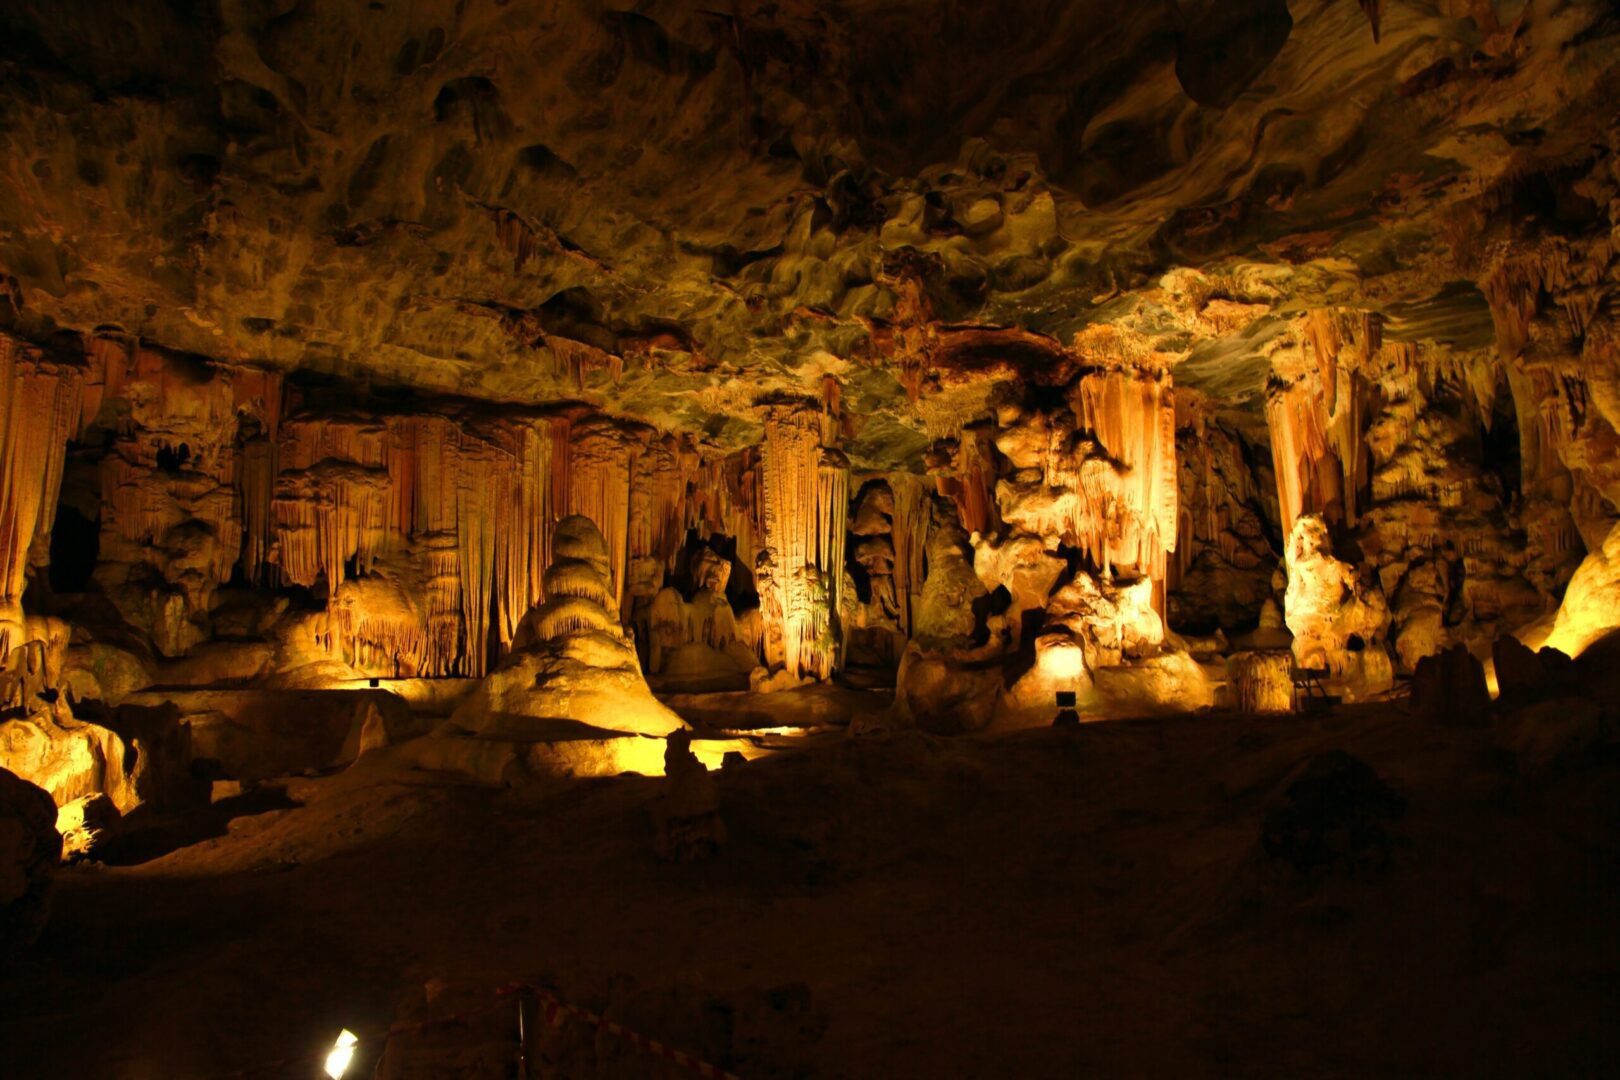 A cave with many pillars and lights on the ceiling